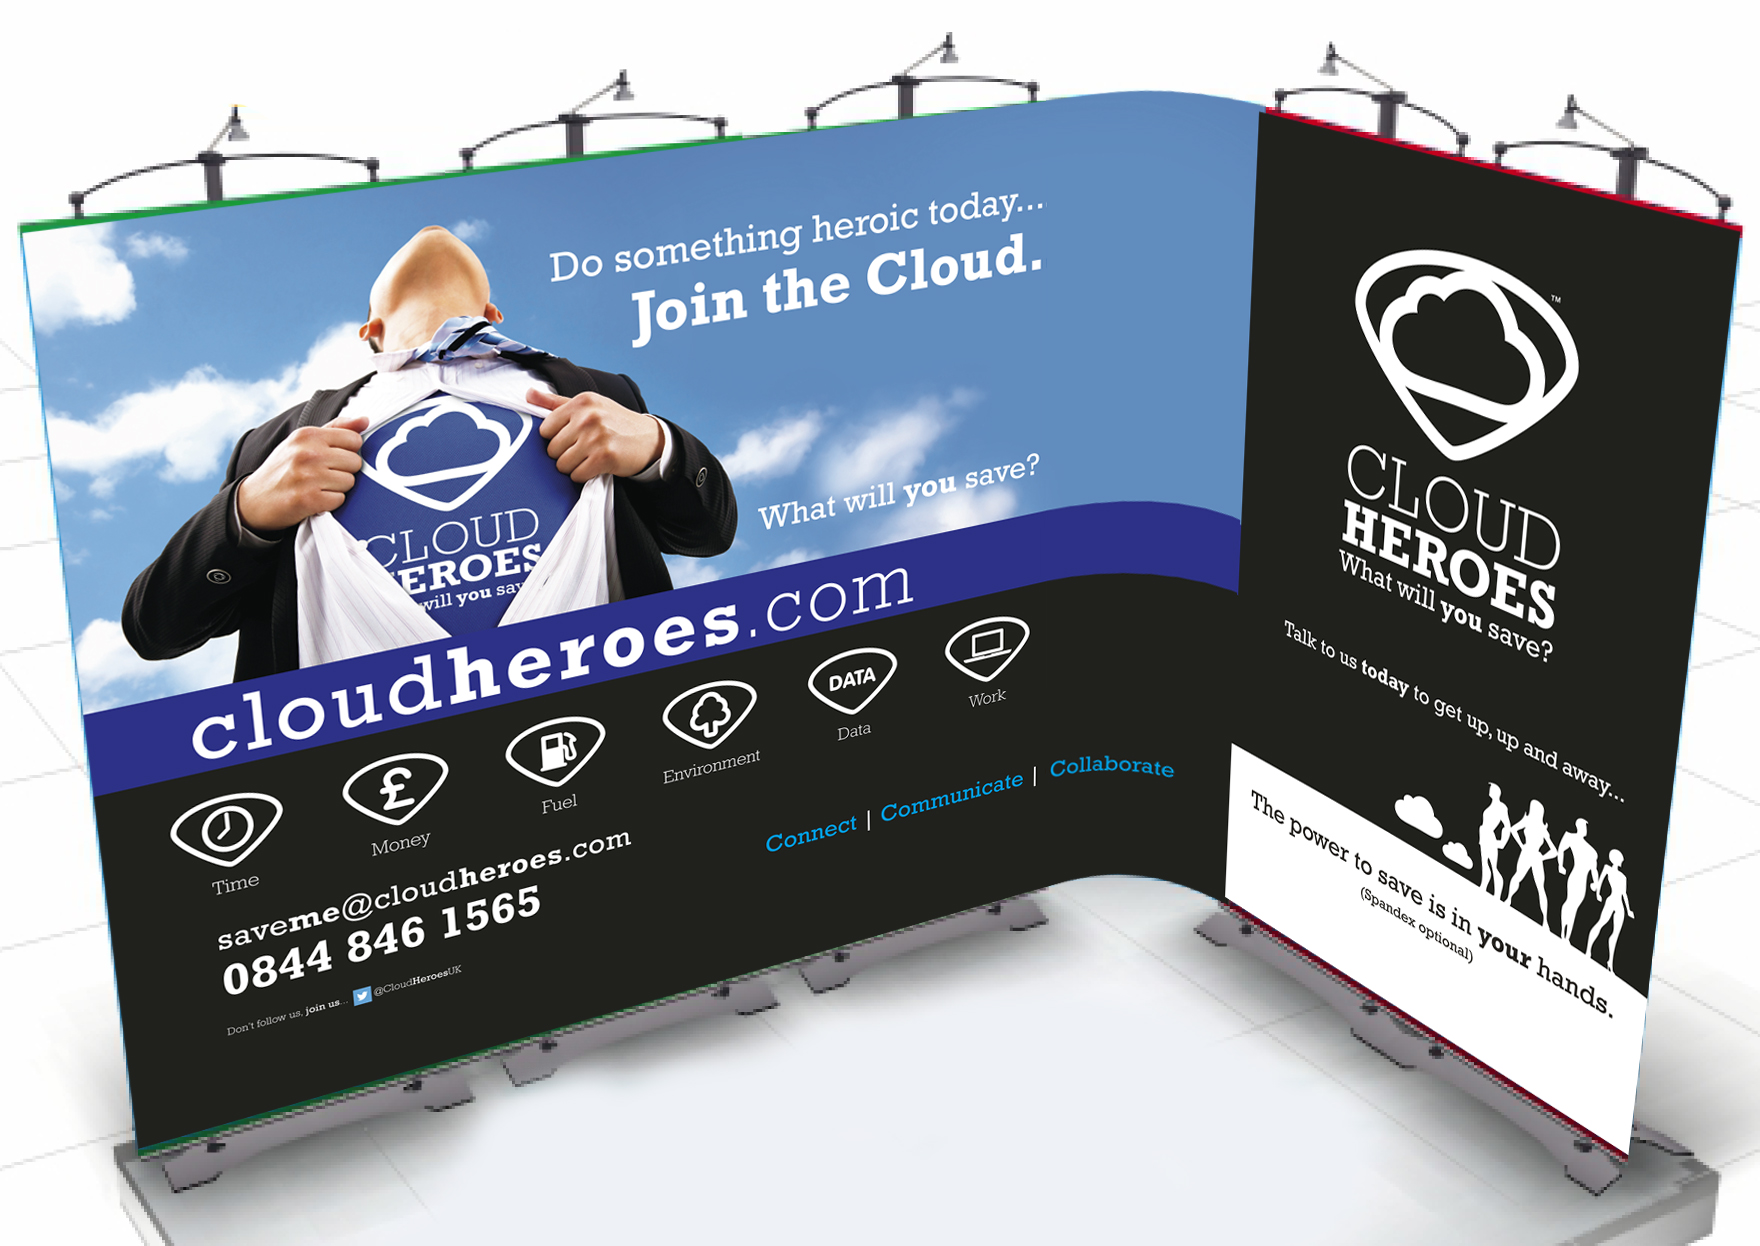 CloudHeroes_ExhibitionStand